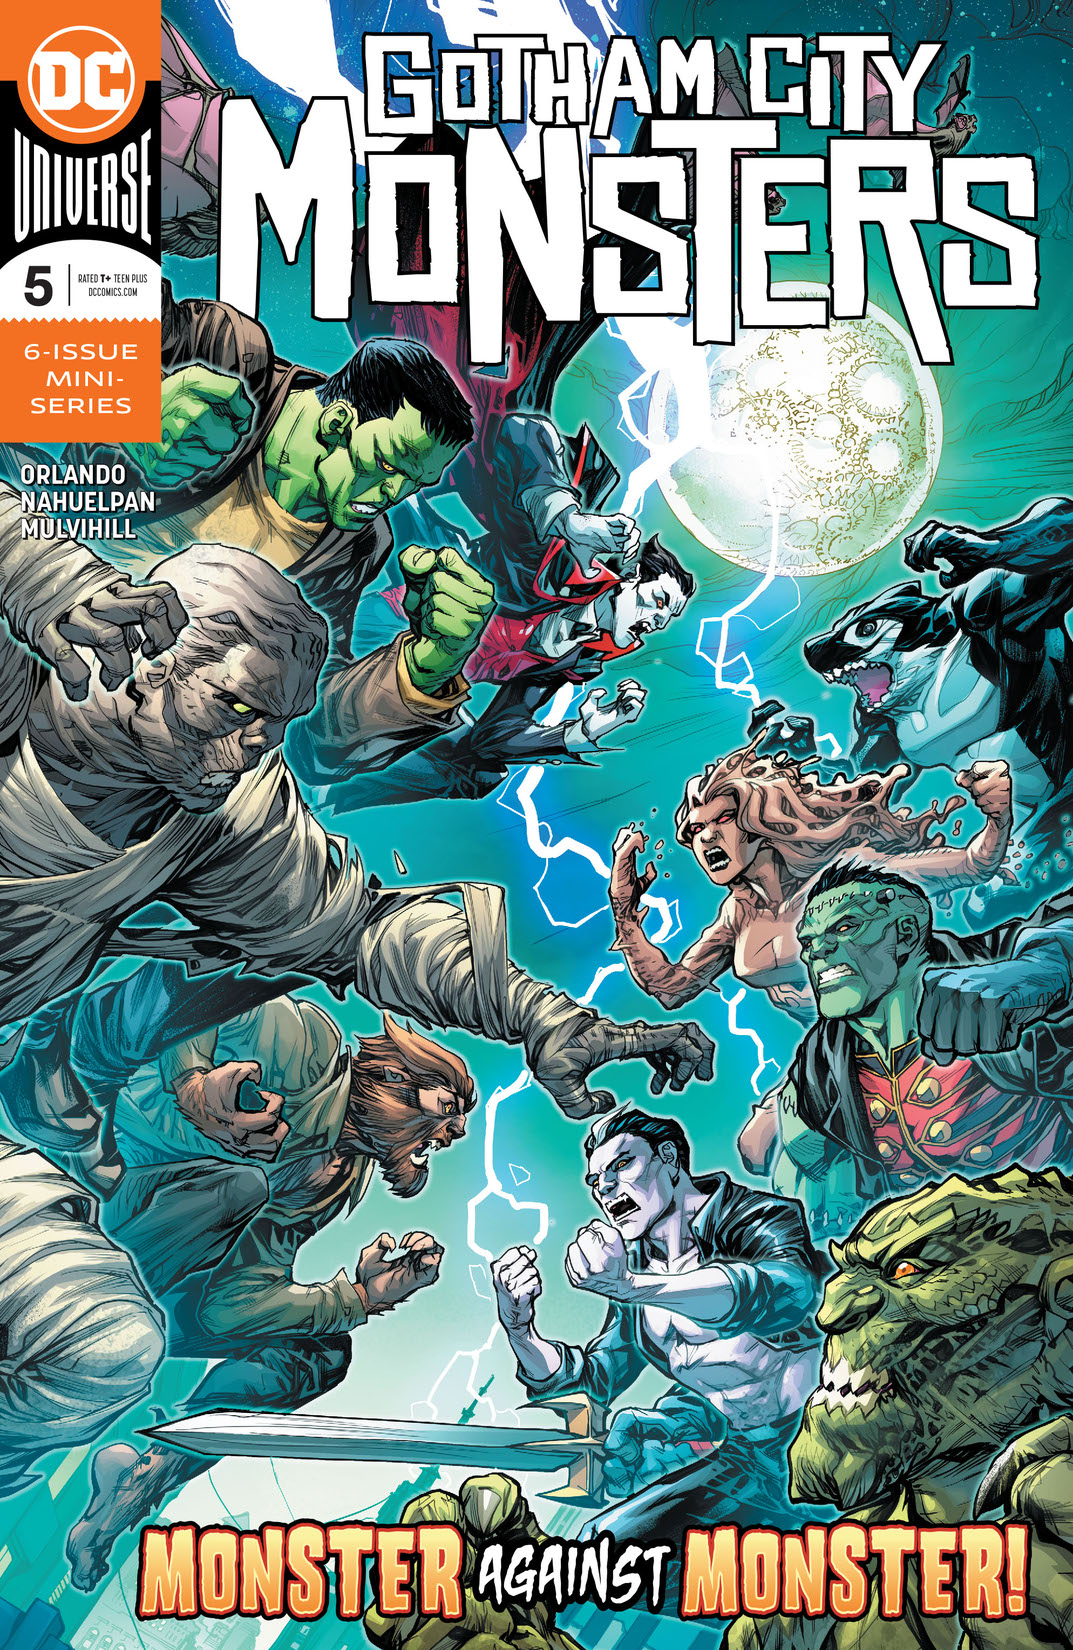 Gotham City Monsters #5 preview images